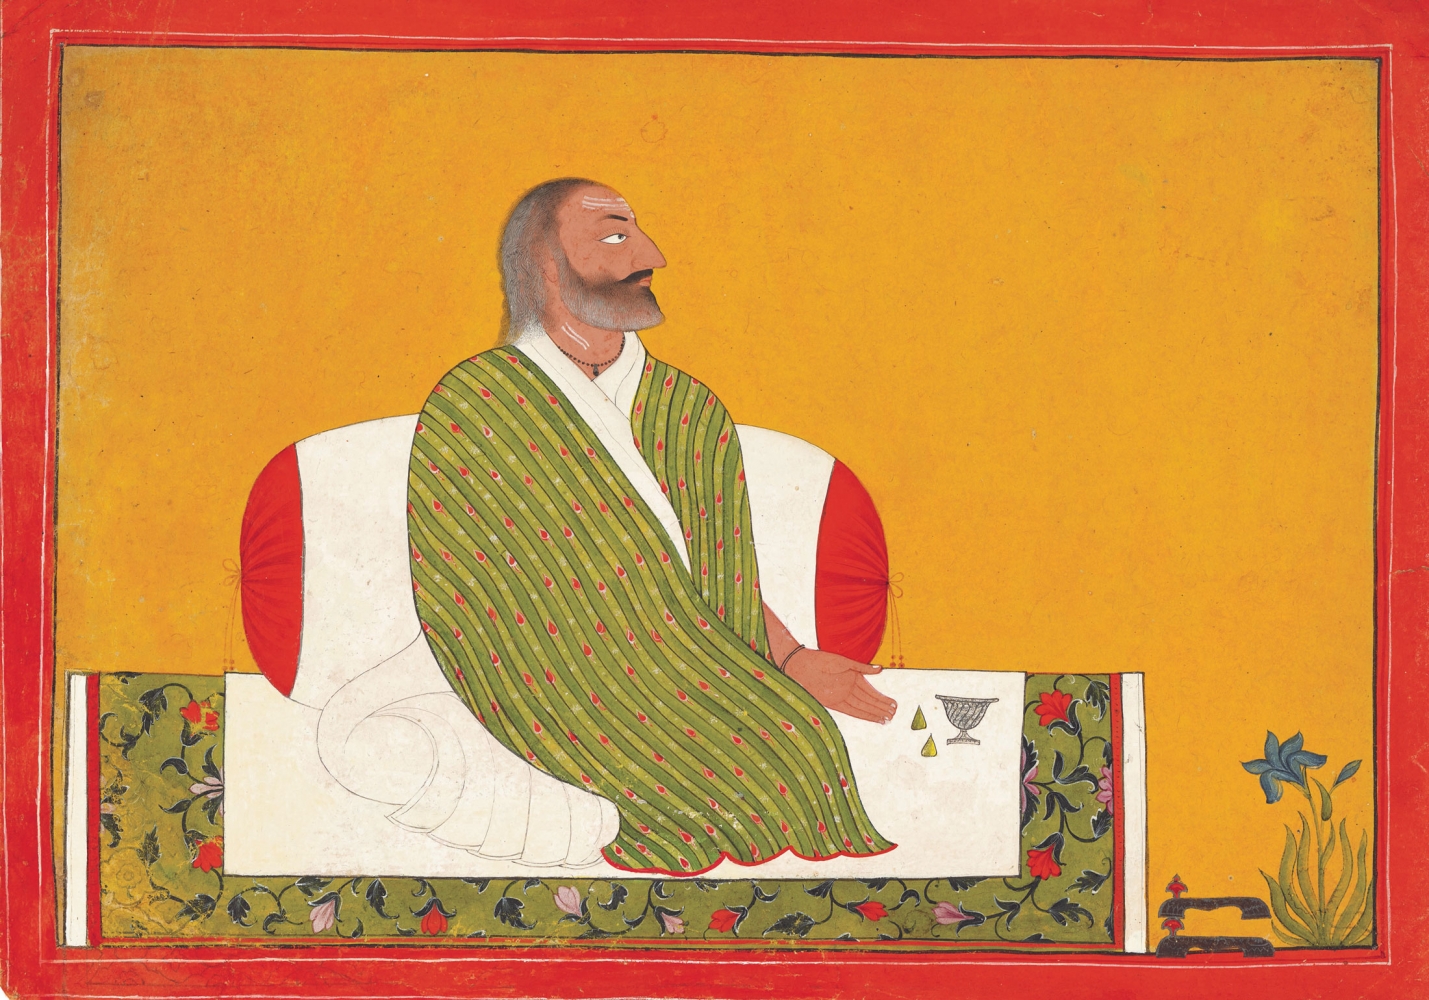 A man of commanding presence, c. 1700-30
Attributed to the Master at the Court of Mankot
Opaque pigments on paper; red border with black inner rule and white inner and outer rules
Folio: 8 x 11 1/8 inches (20.3 x 28.4 cm)
Painting: 7 1/8 x 10 1/8 inches (17.8 x 25.8 cm)